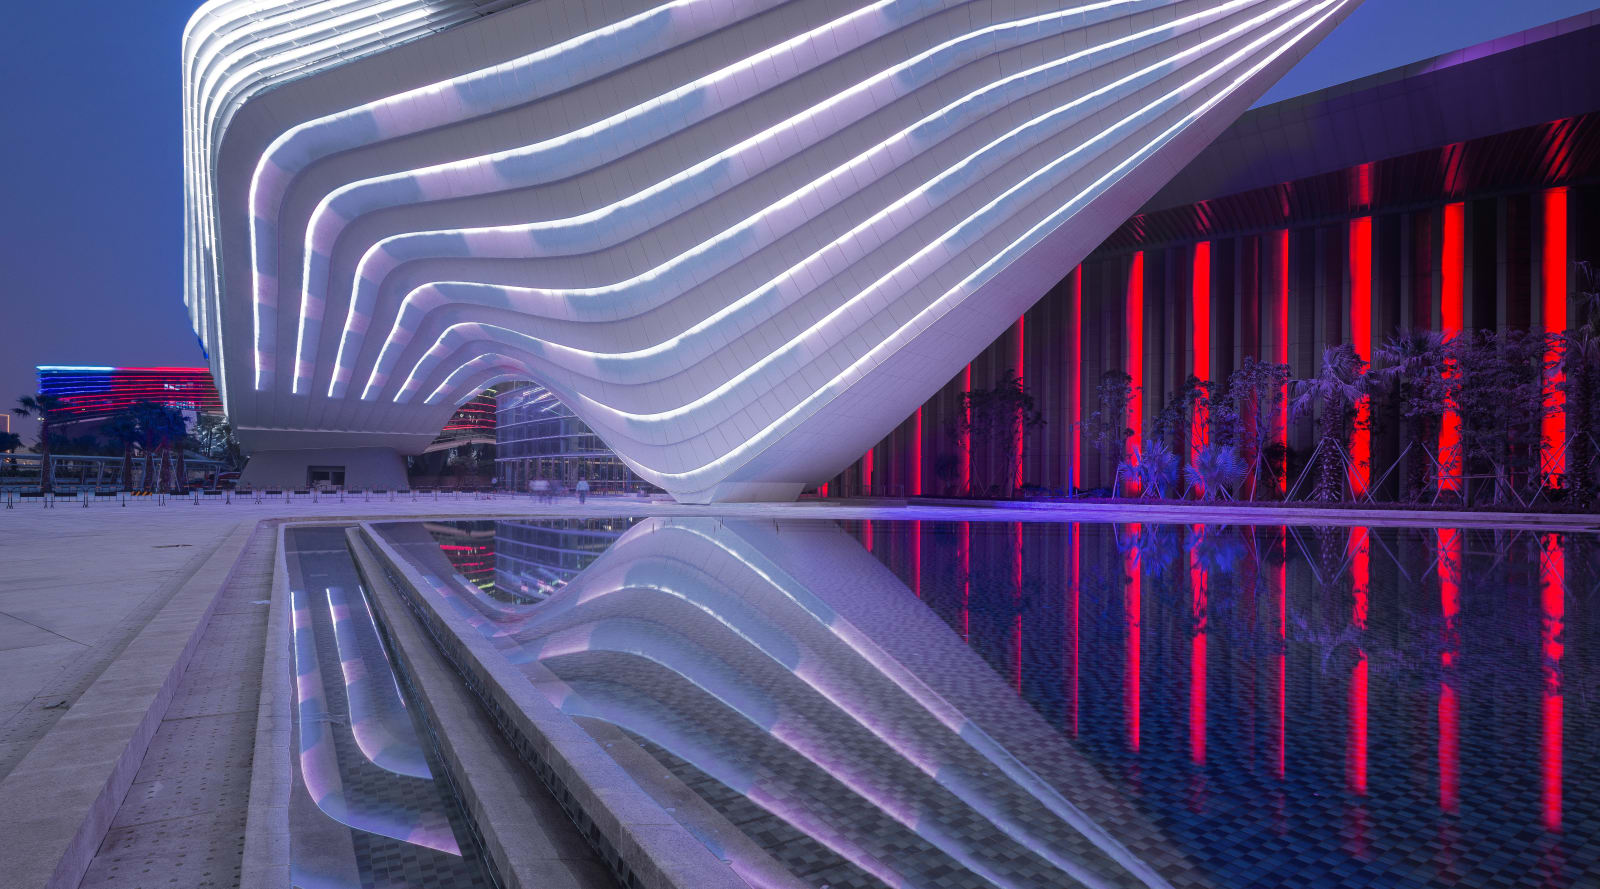 RMJM Milano's design for the pedestrian bridge project in China was  shortlisted for the International Concept Design Competition. - RMJM  Architecture